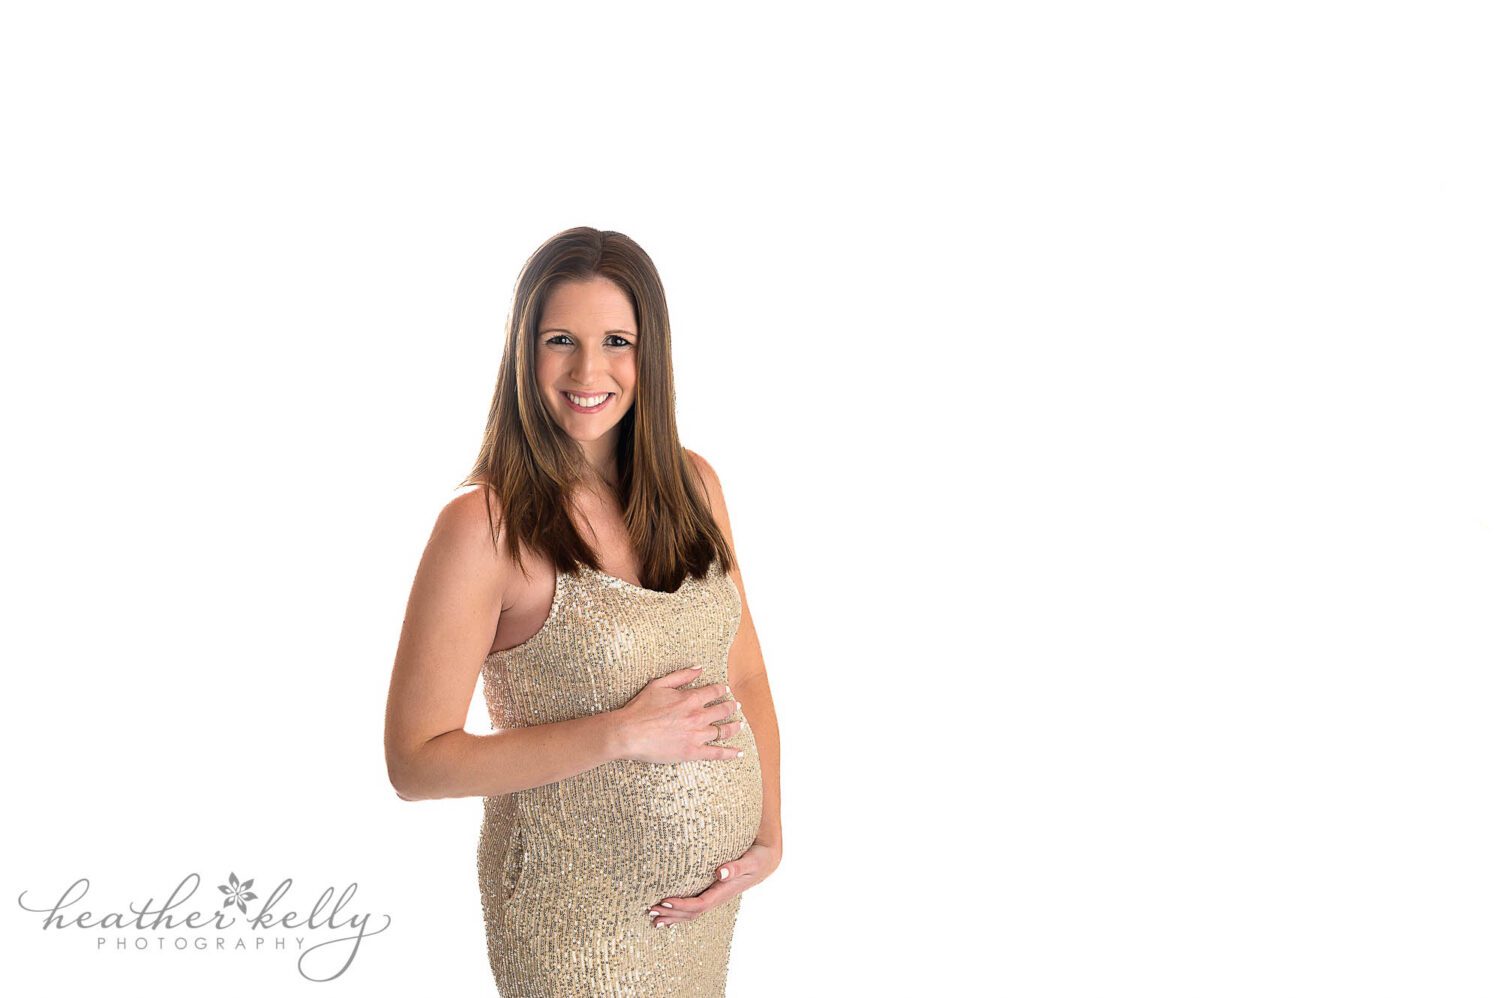 Stamford CT mom to be posing at her maternity portrait photography session. 